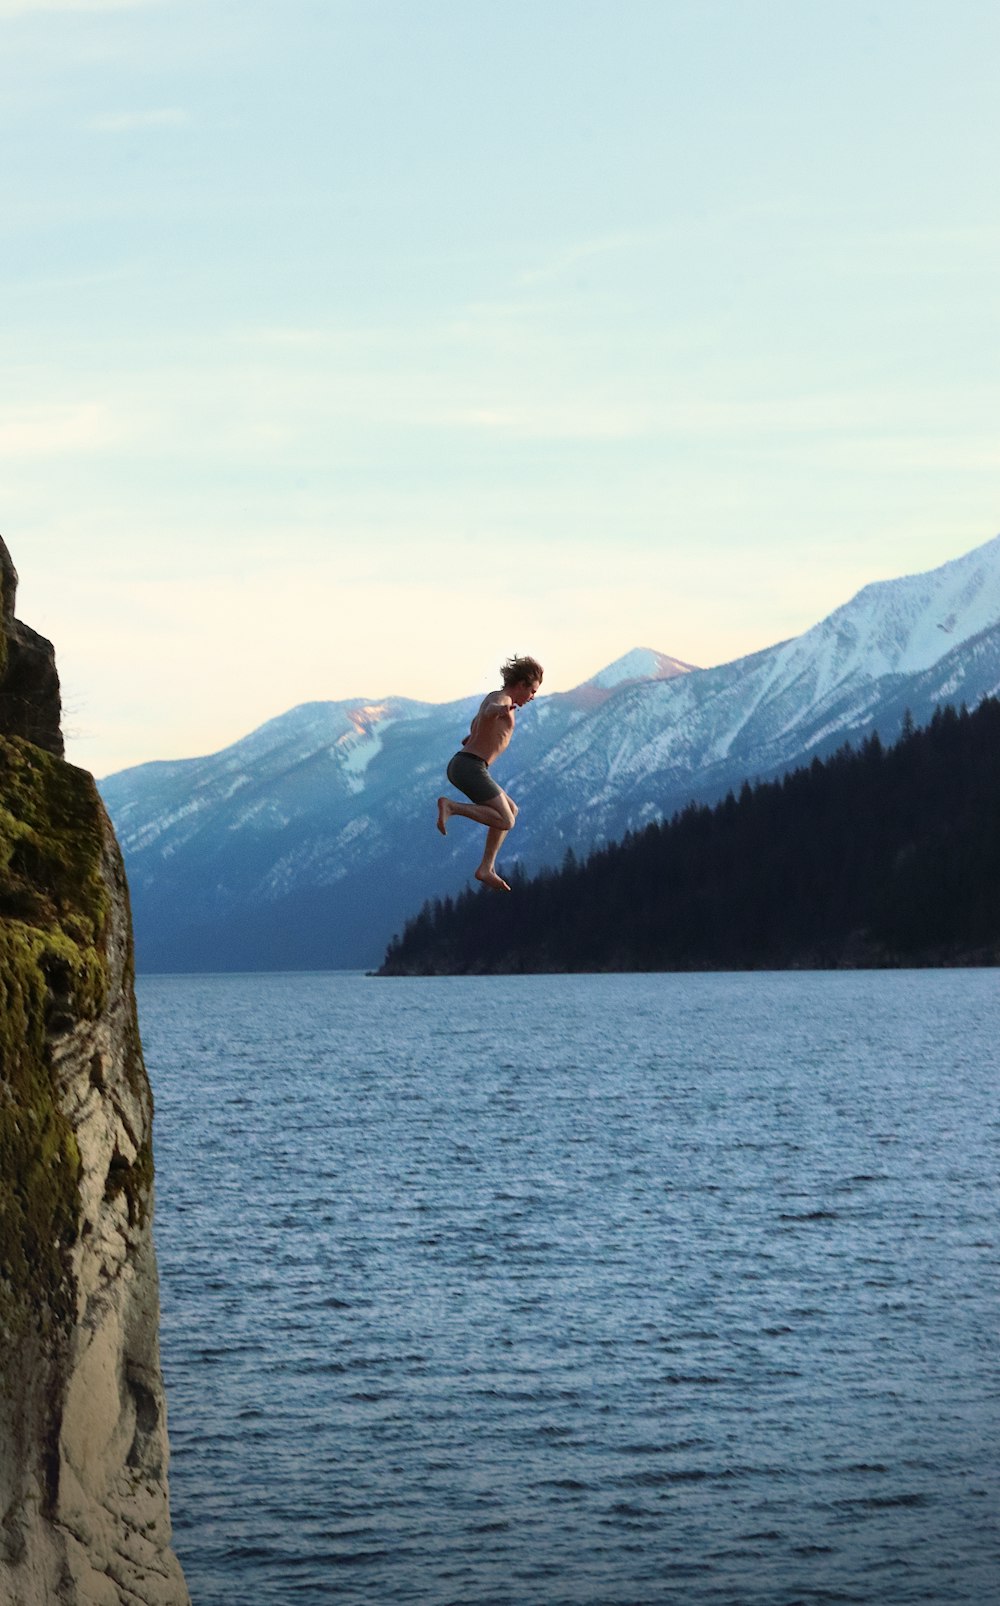 a man jumping off a cliff into a lake